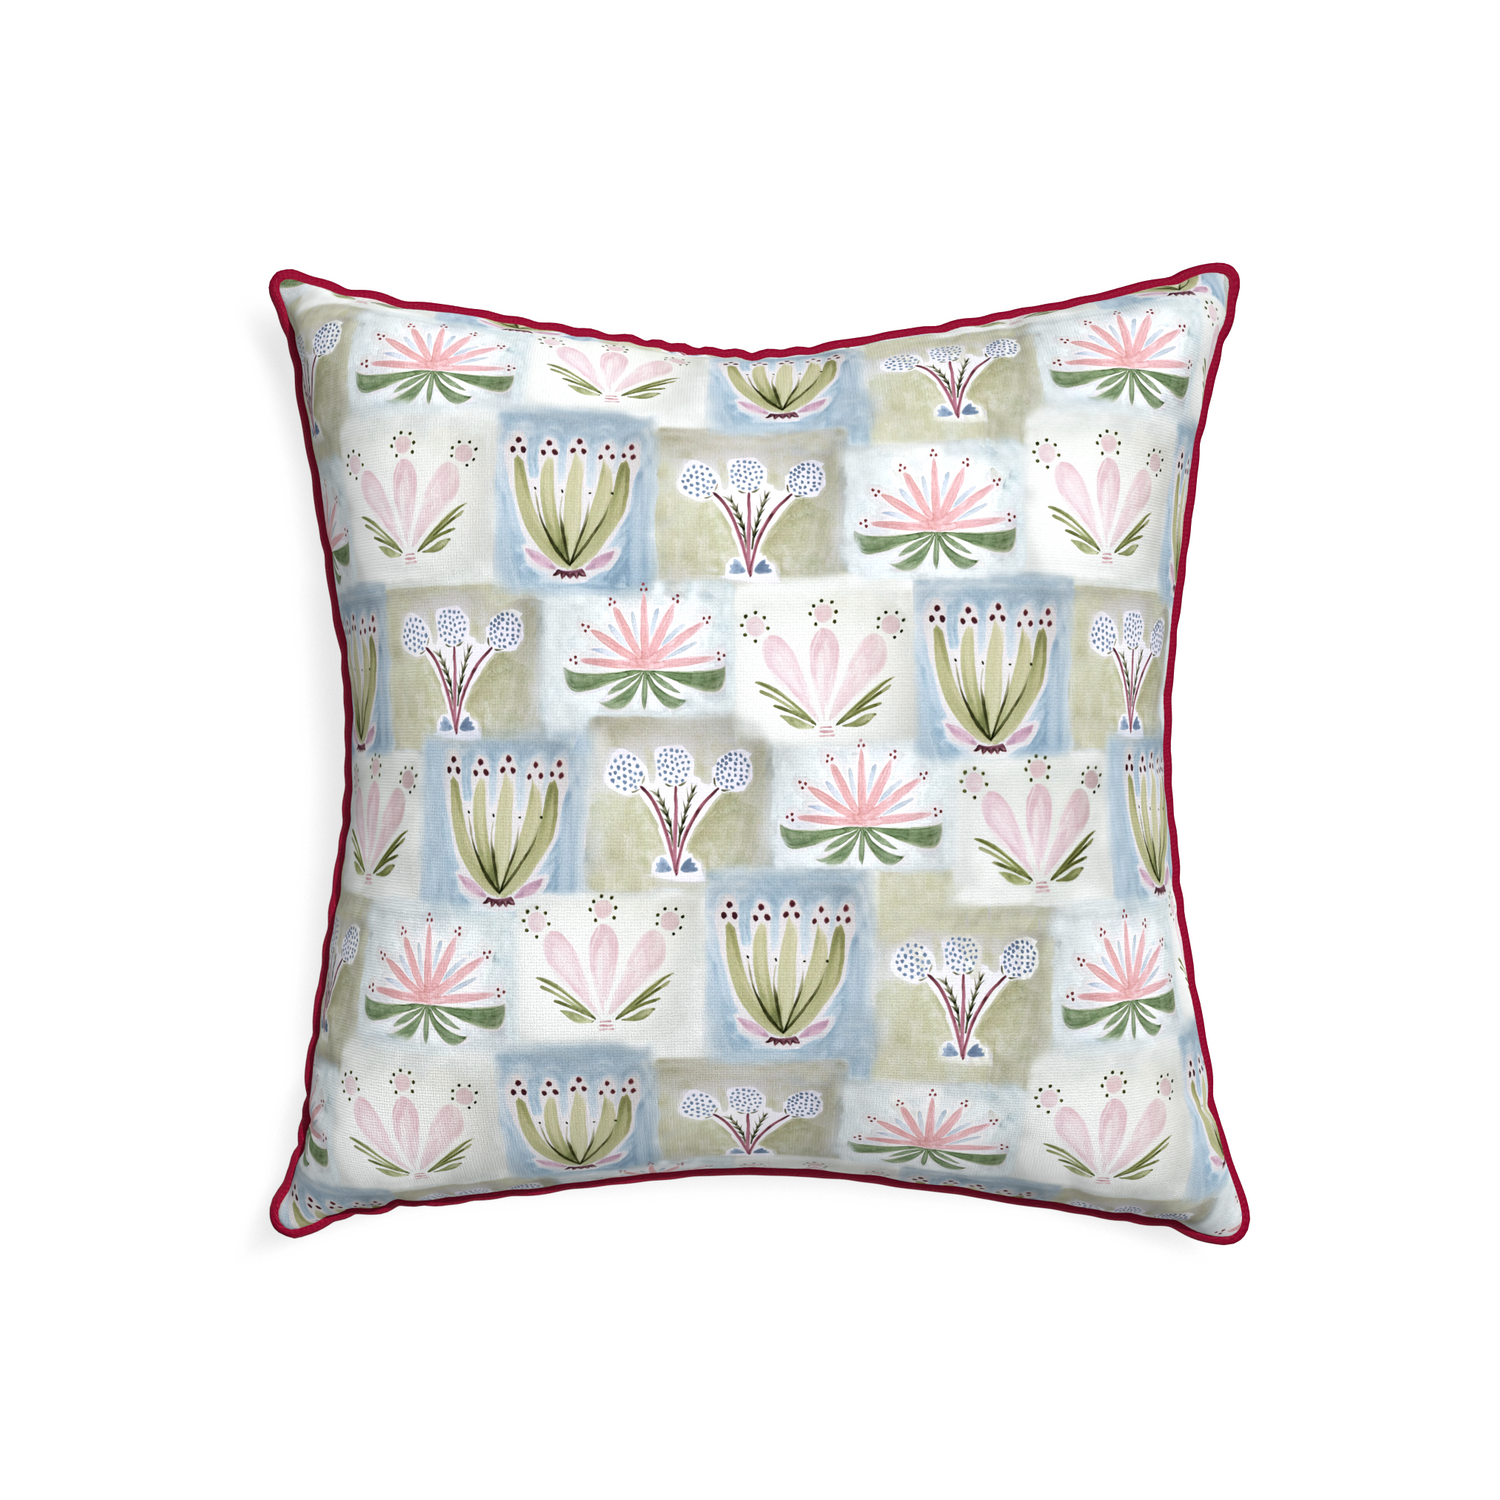 22-square harper custom hand-painted floralpillow with raspberry piping on white background